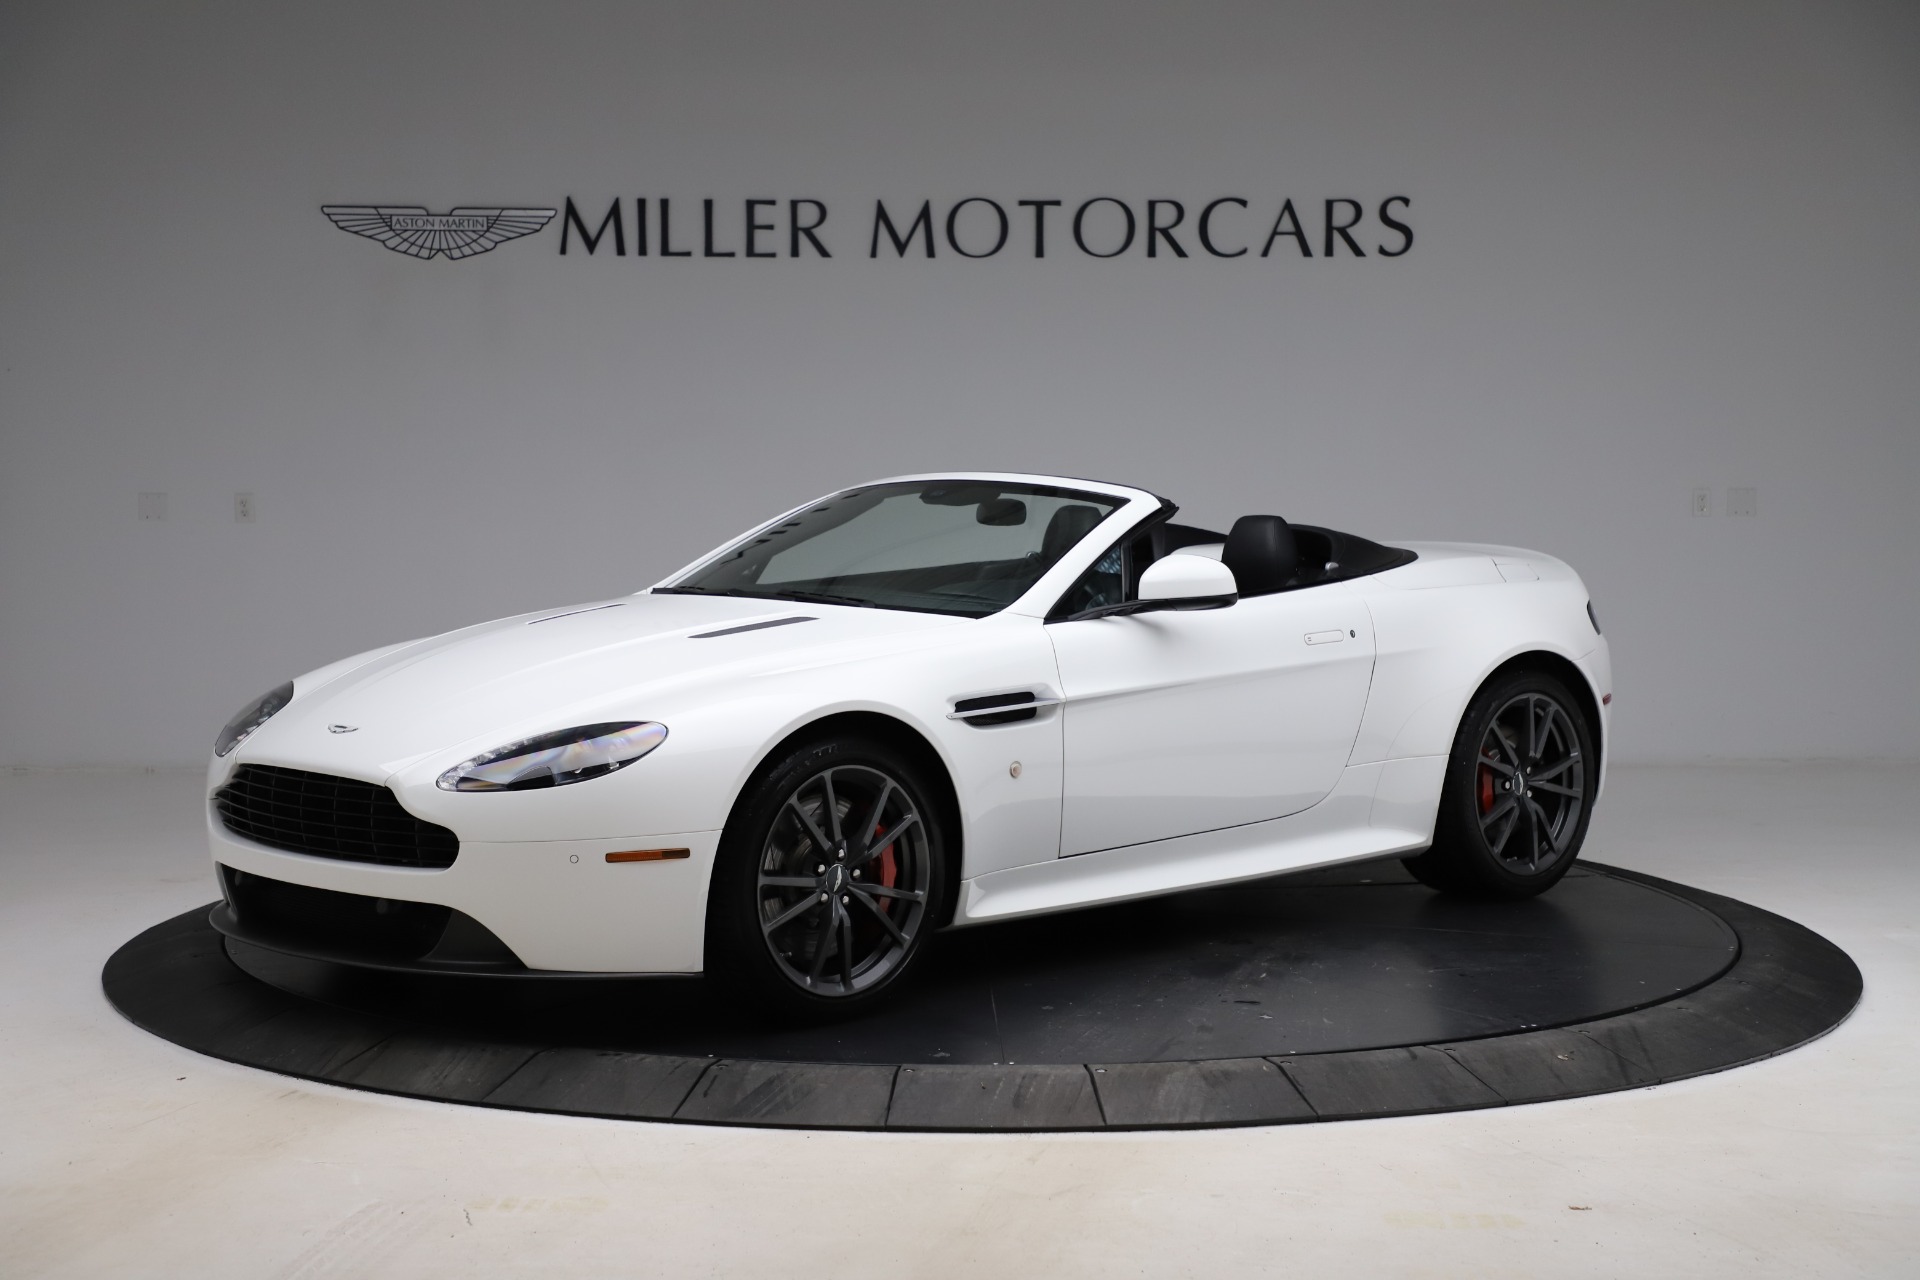 Used 2015 Aston Martin V8 Vantage GT Roadster for sale Sold at Bugatti of Greenwich in Greenwich CT 06830 1